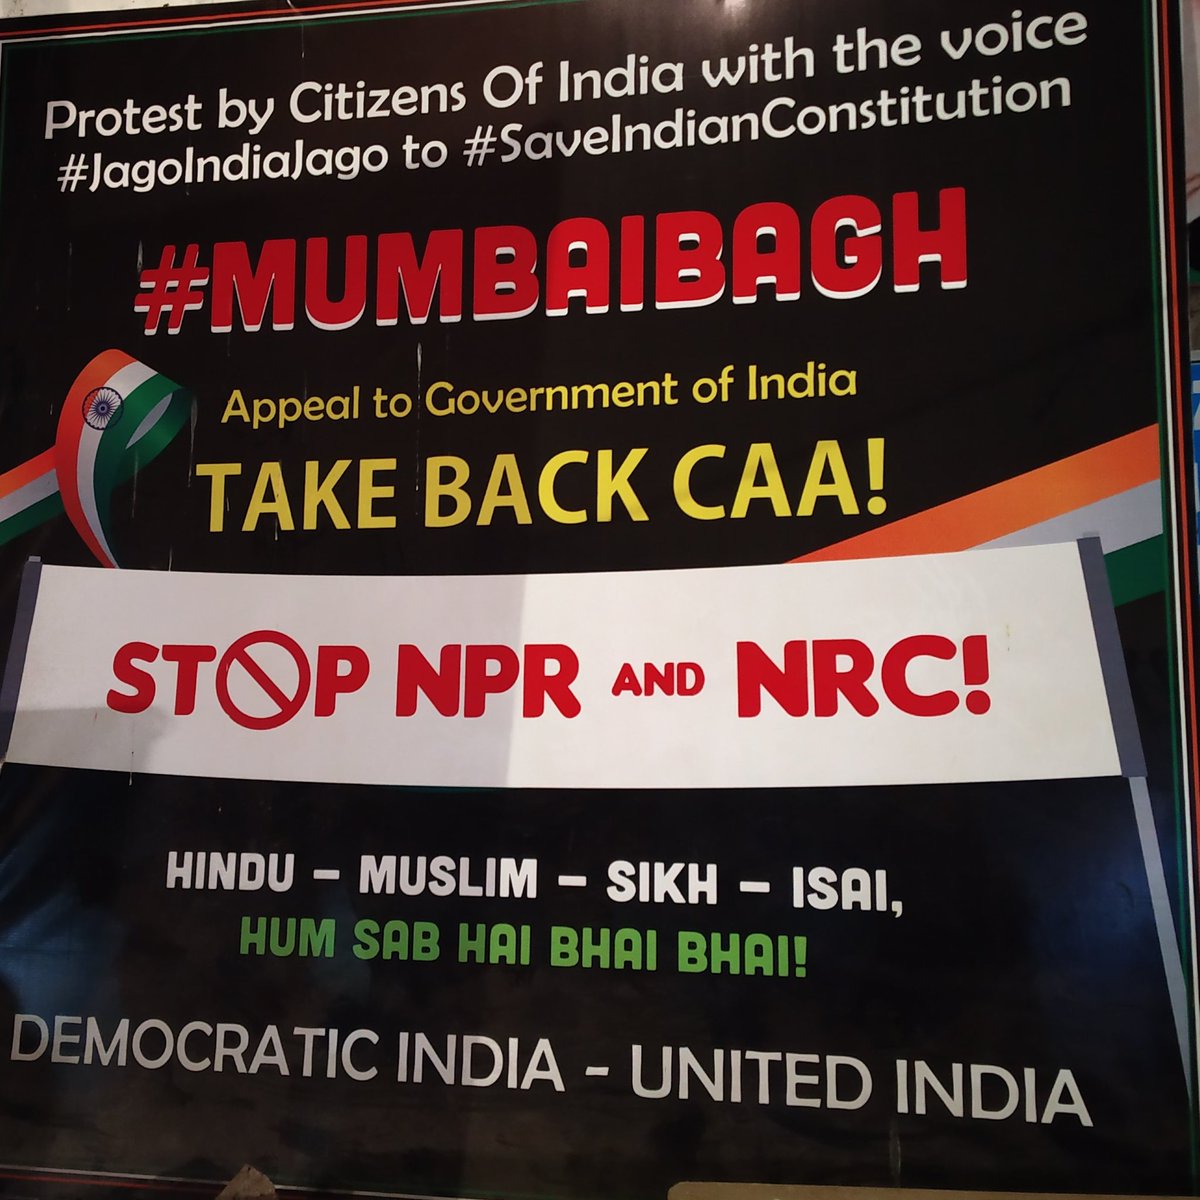 Come All Join Us In A Huge Numbers..We Need You..India Need You...Say #NoToCAA_NRC_NPR #mumbaibaugh #mumbaicentral #India_With_Shaheenbagh #chalomumbaibagh